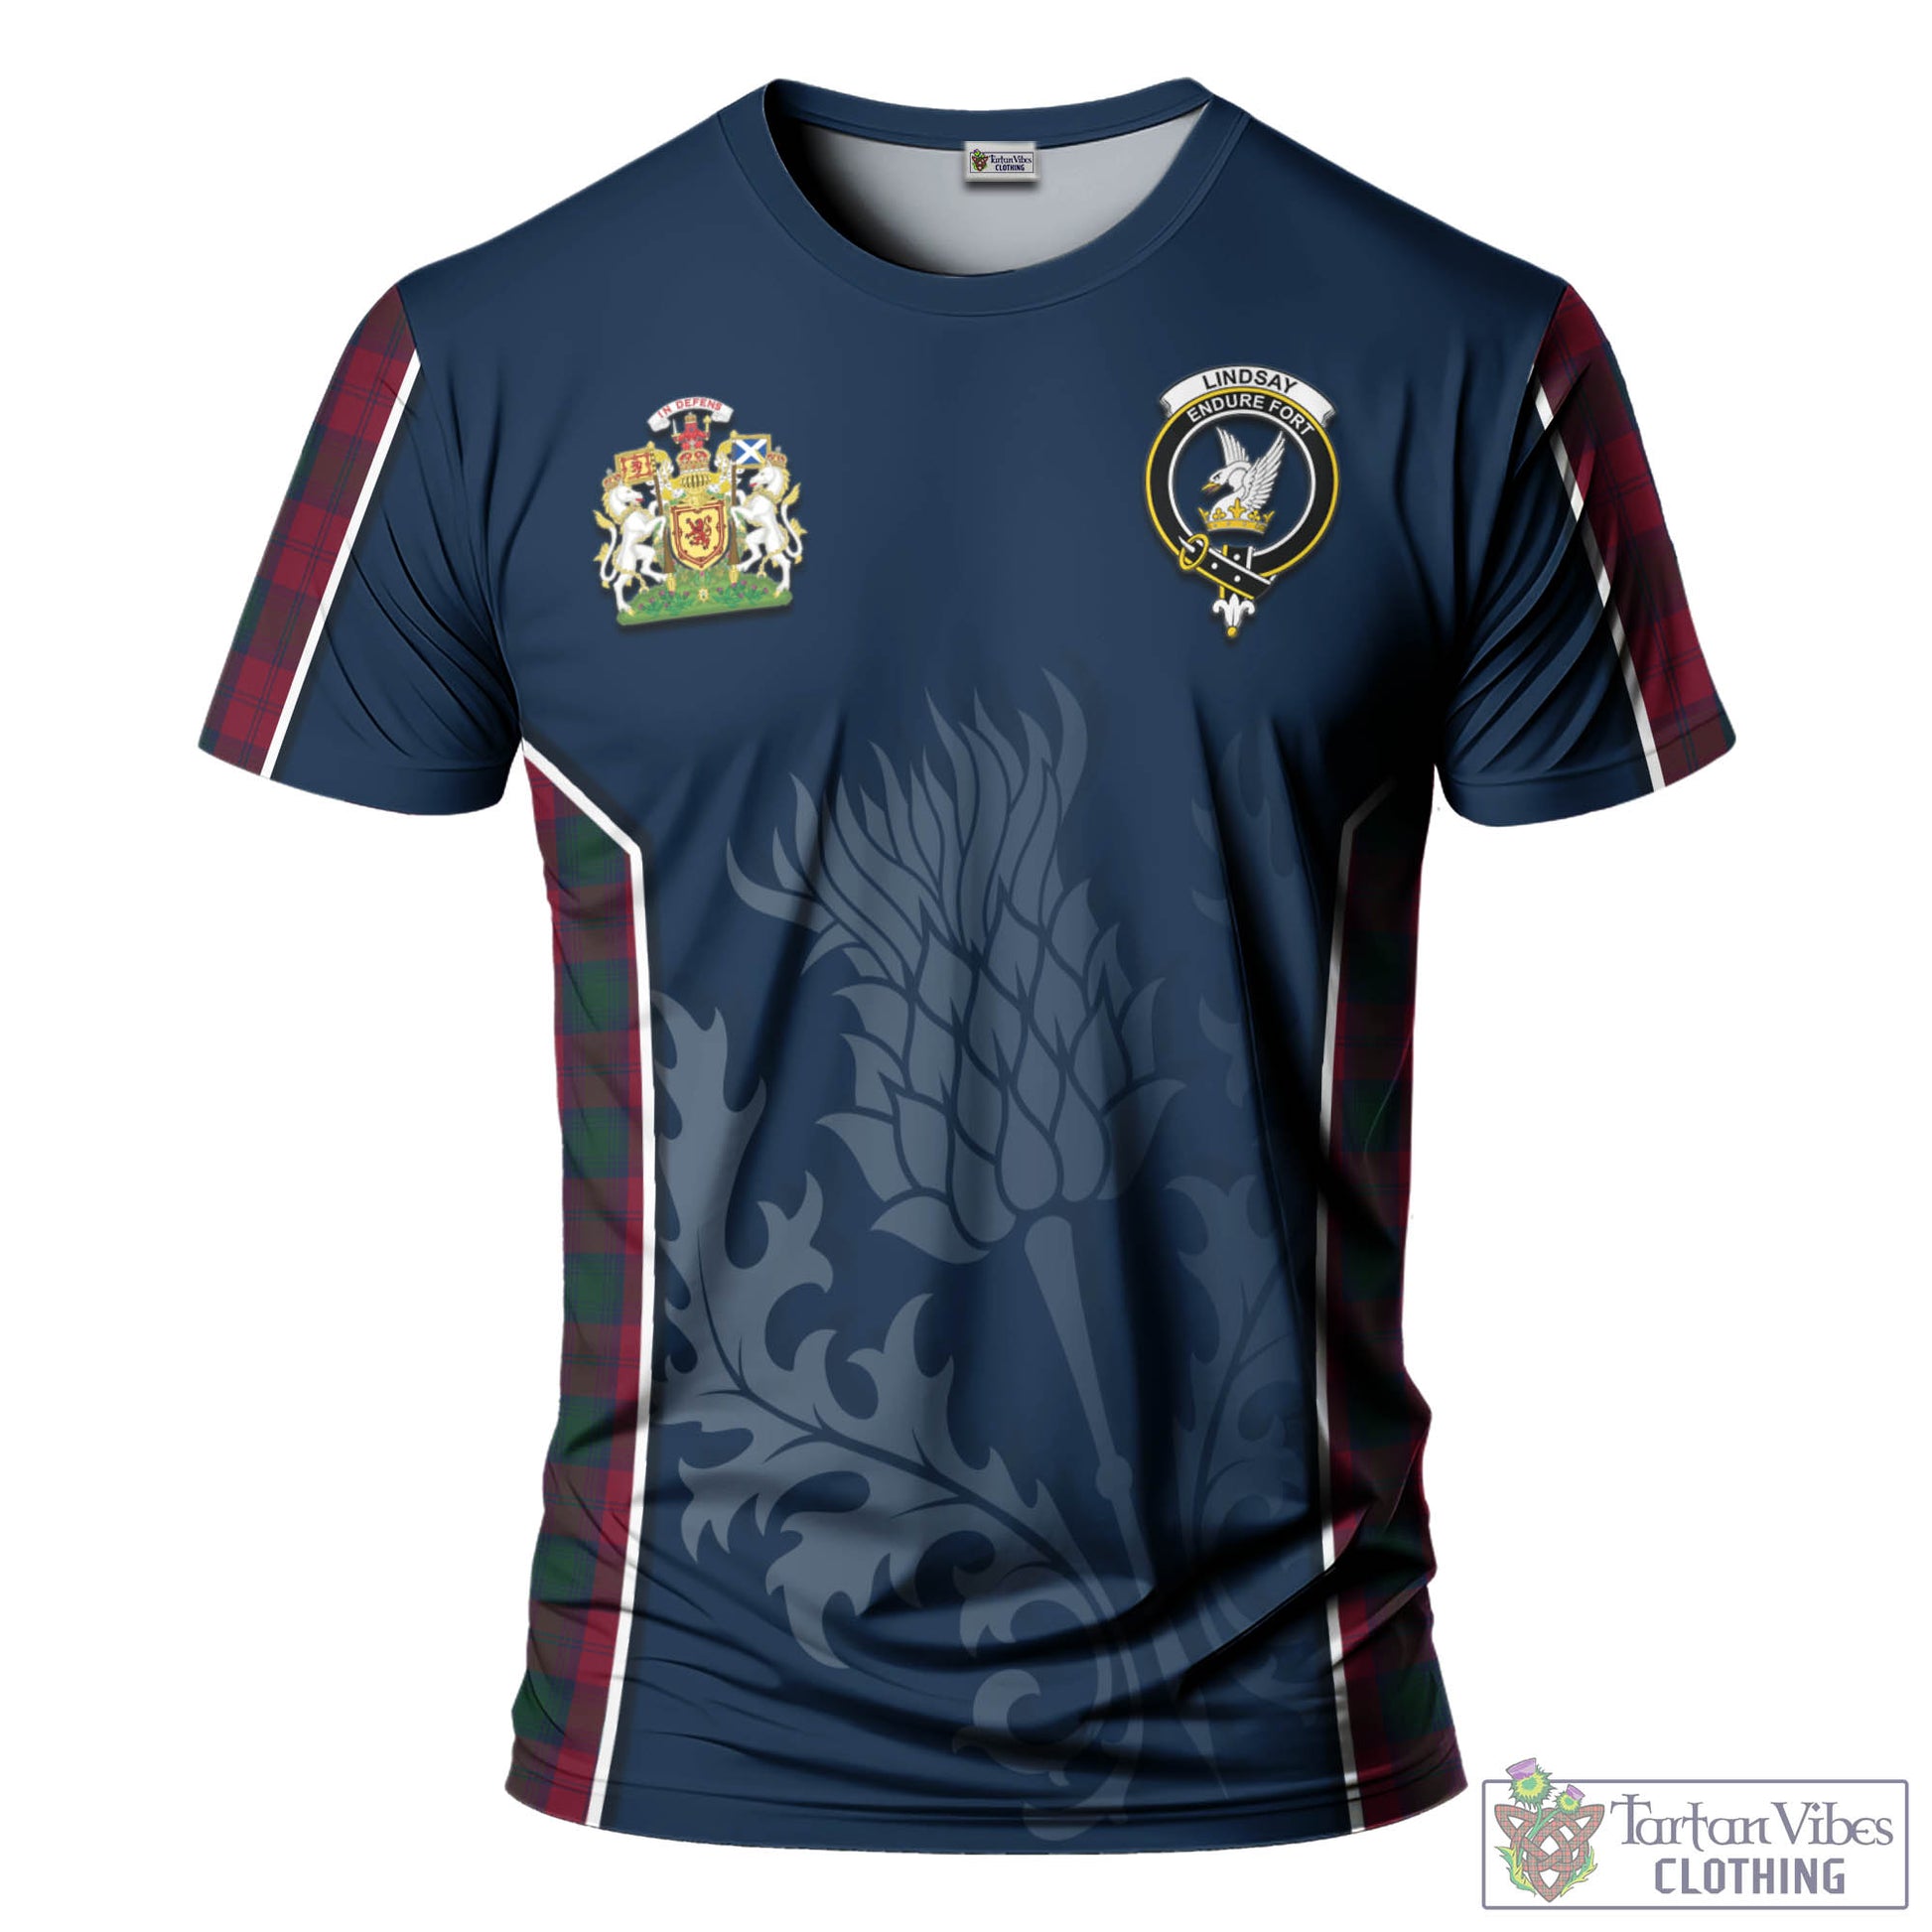 Tartan Vibes Clothing Lindsay Tartan T-Shirt with Family Crest and Scottish Thistle Vibes Sport Style